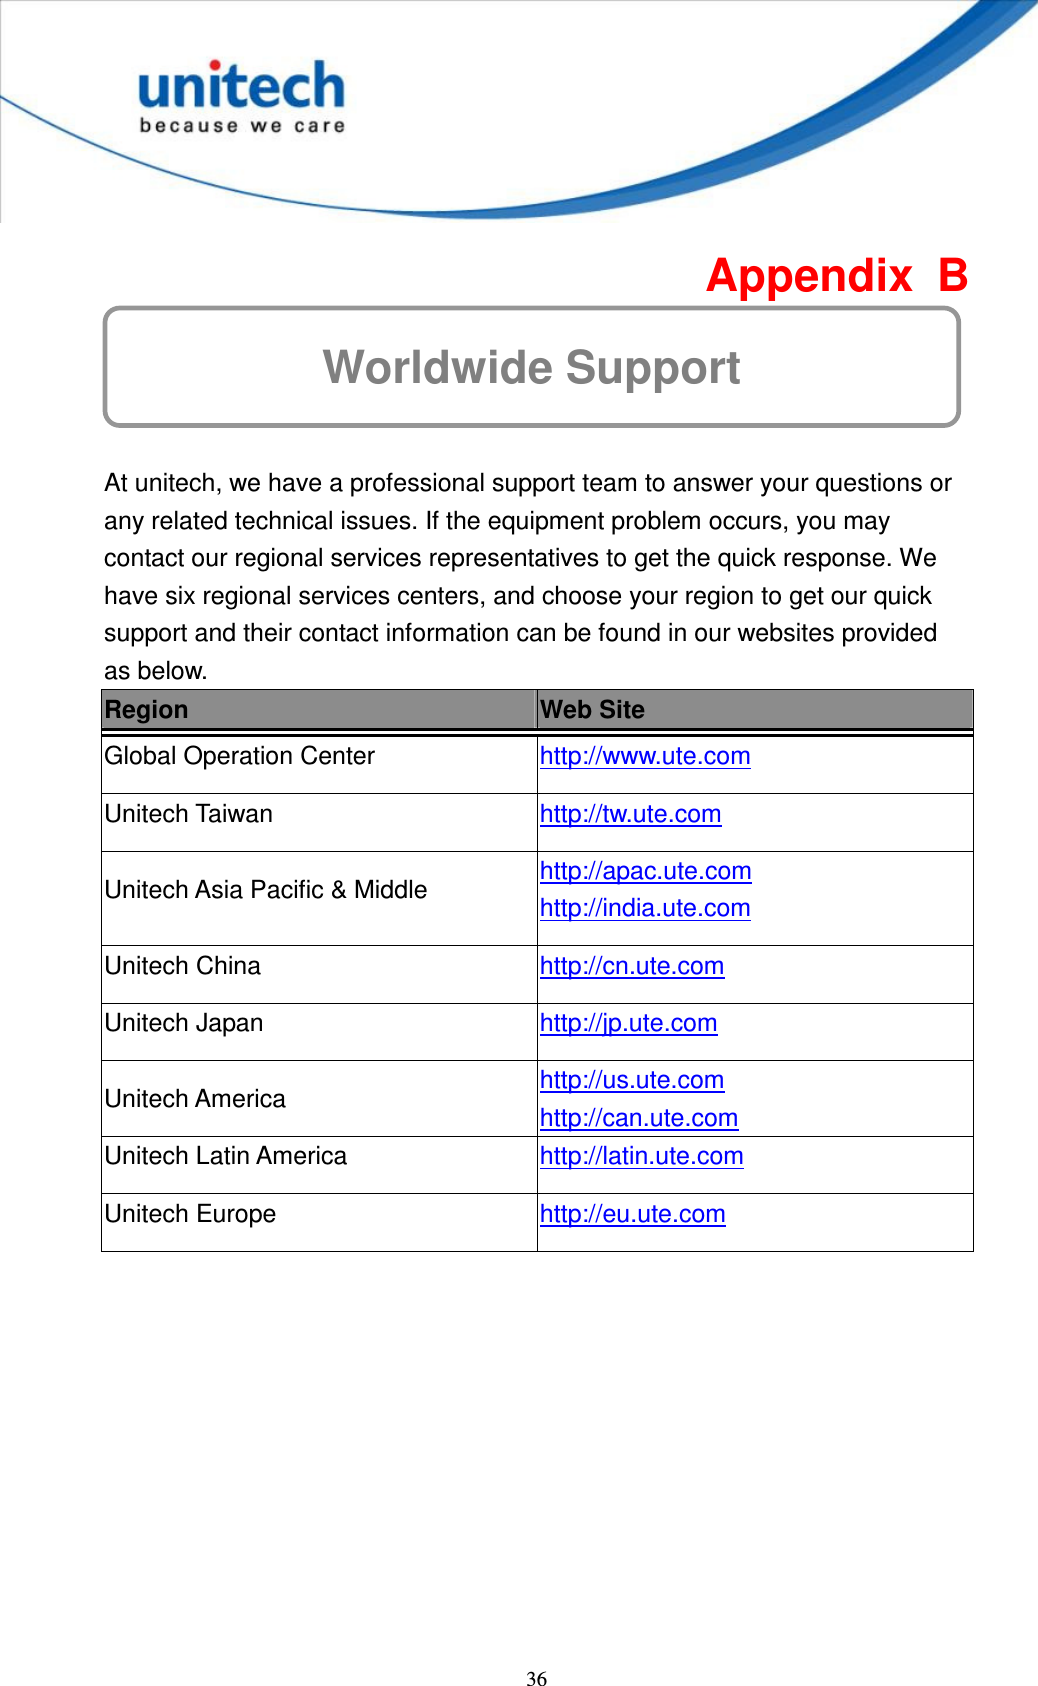  36 Worldwide Support  Appendix  B   At unitech, we have a professional support team to answer your questions or any related technical issues. If the equipment problem occurs, you may contact our regional services representatives to get the quick response. We have six regional services centers, and choose your region to get our quick support and their contact information can be found in our websites provided as below. Region  Web Site Global Operation Center  http://www.ute.com   Unitech Taiwan  http://tw.ute.com   Unitech Asia Pacific &amp; Middle  http://apac.ute.com http://india.ute.com   Unitech China  http://cn.ute.com   Unitech Japan  http://jp.ute.com   Unitech America  http://us.ute.com   http://can.ute.com   Unitech Latin America  http://latin.ute.com   Unitech Europe  http://eu.ute.com    